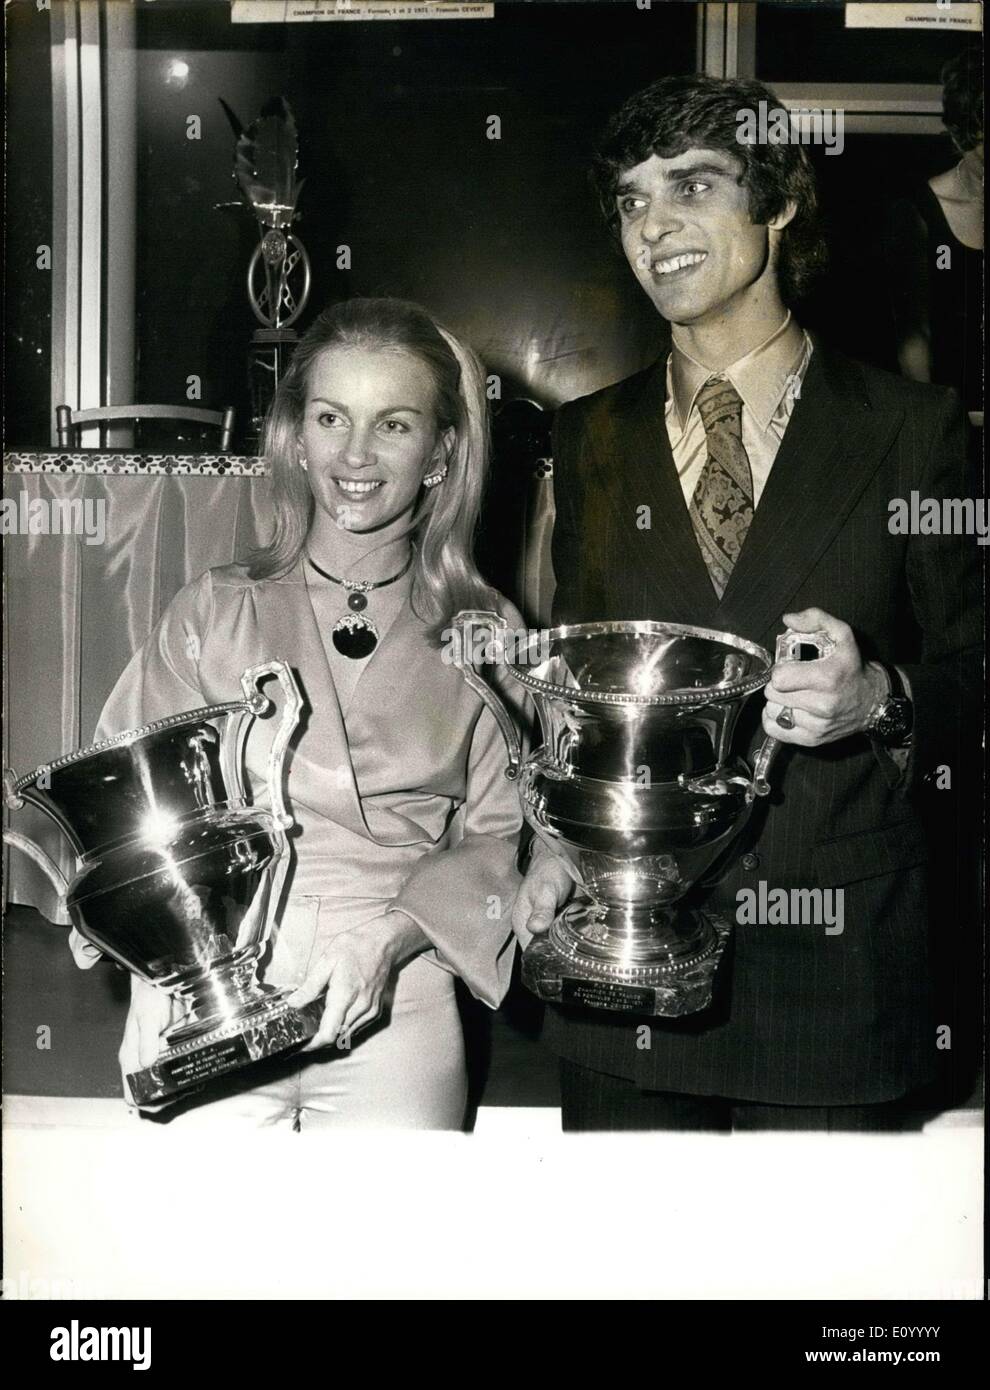 Dec. 14, 1971 - Marie Claude Beaumont and Francois Cevert stand with their trophies as champions of the 1971 Tour de France Automobile. Stock Photo